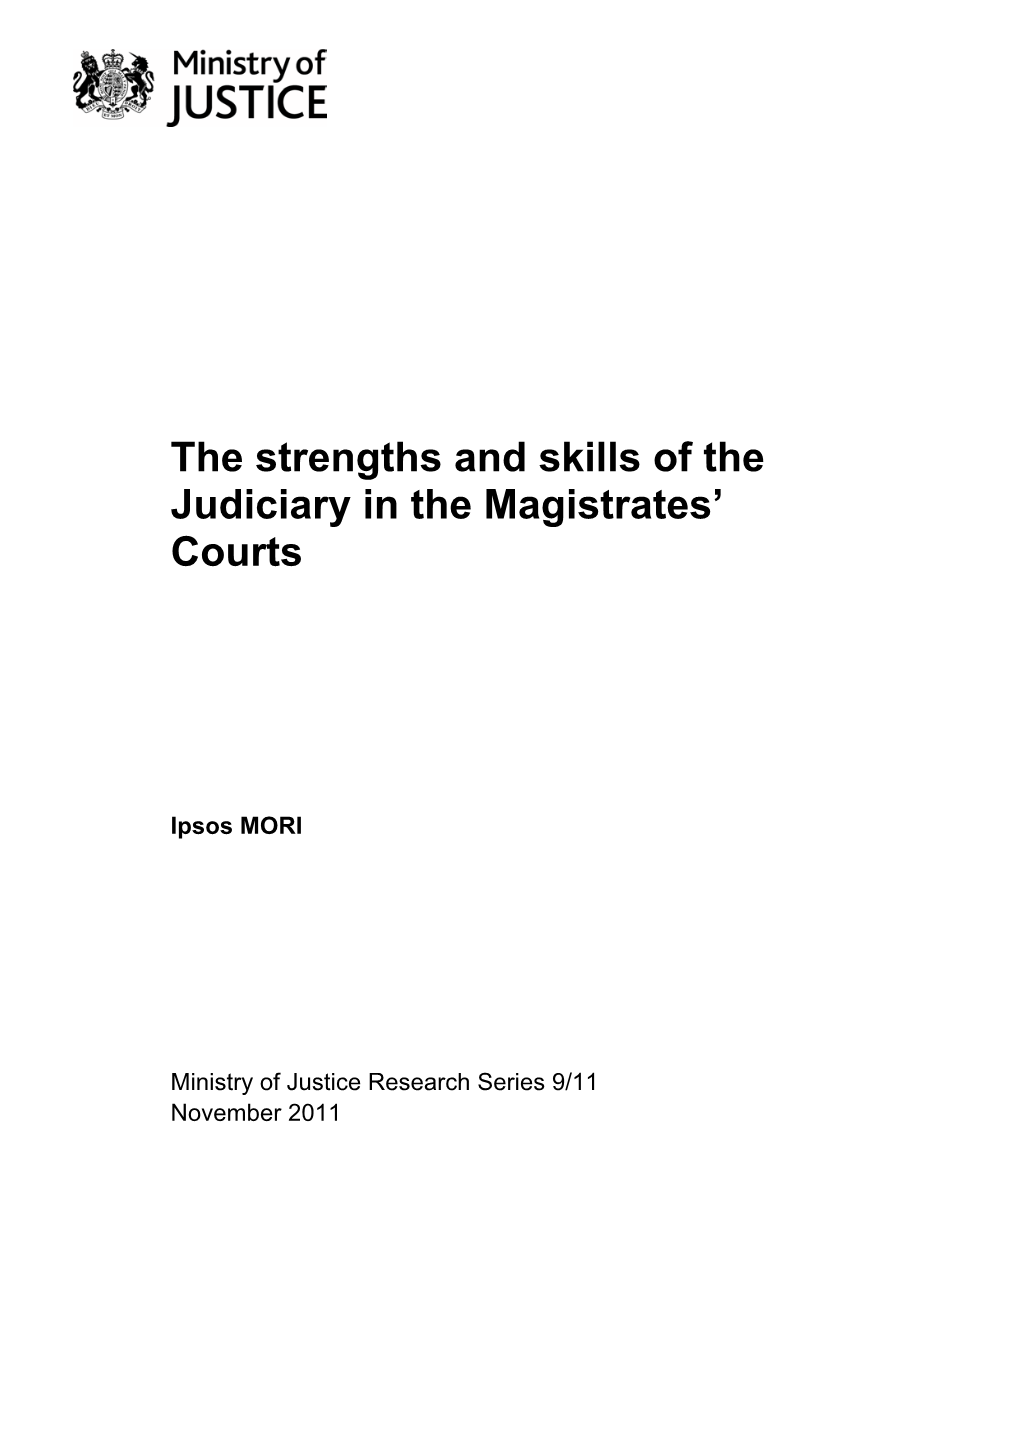 The Strengths and Skills of the Judiciary in the Magistrates' Courts